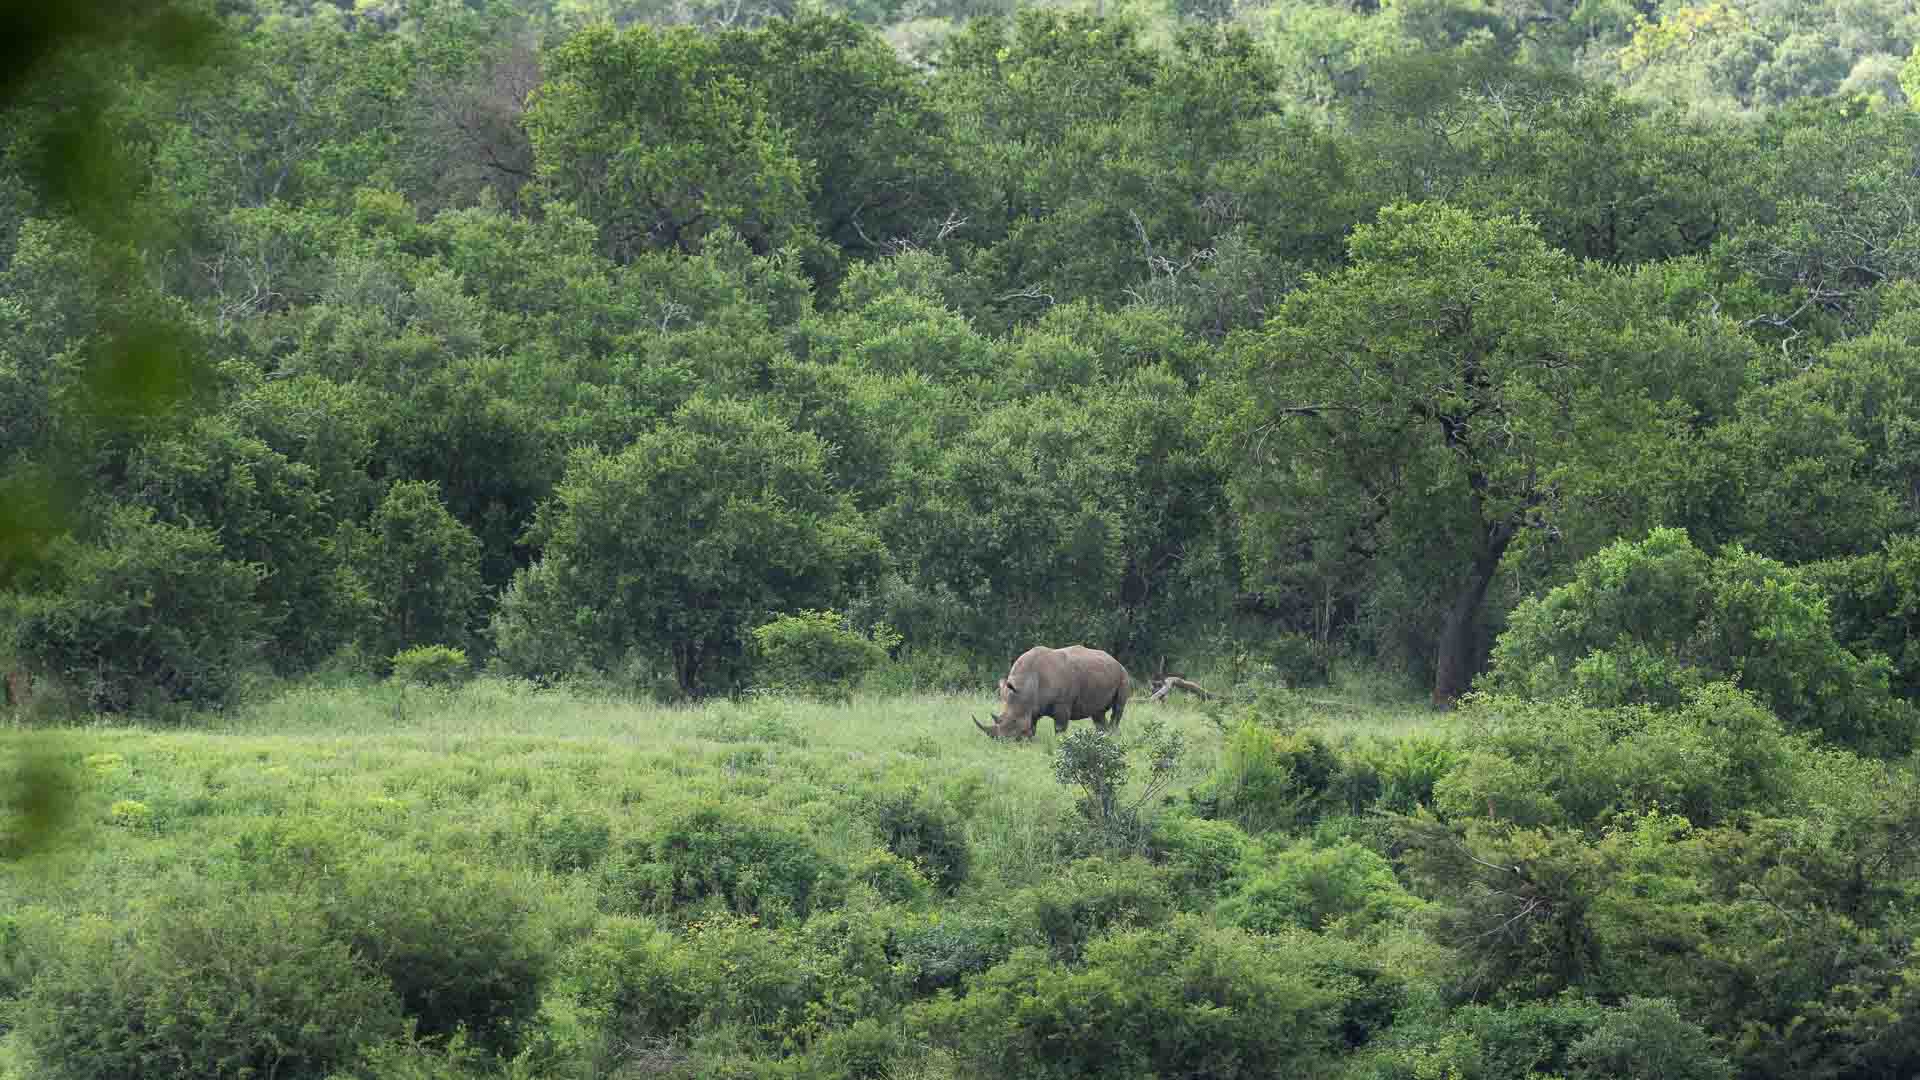 A white rhino grazing surrounded by green bushes and trees in the Hluhluwe-iMfolozi Park